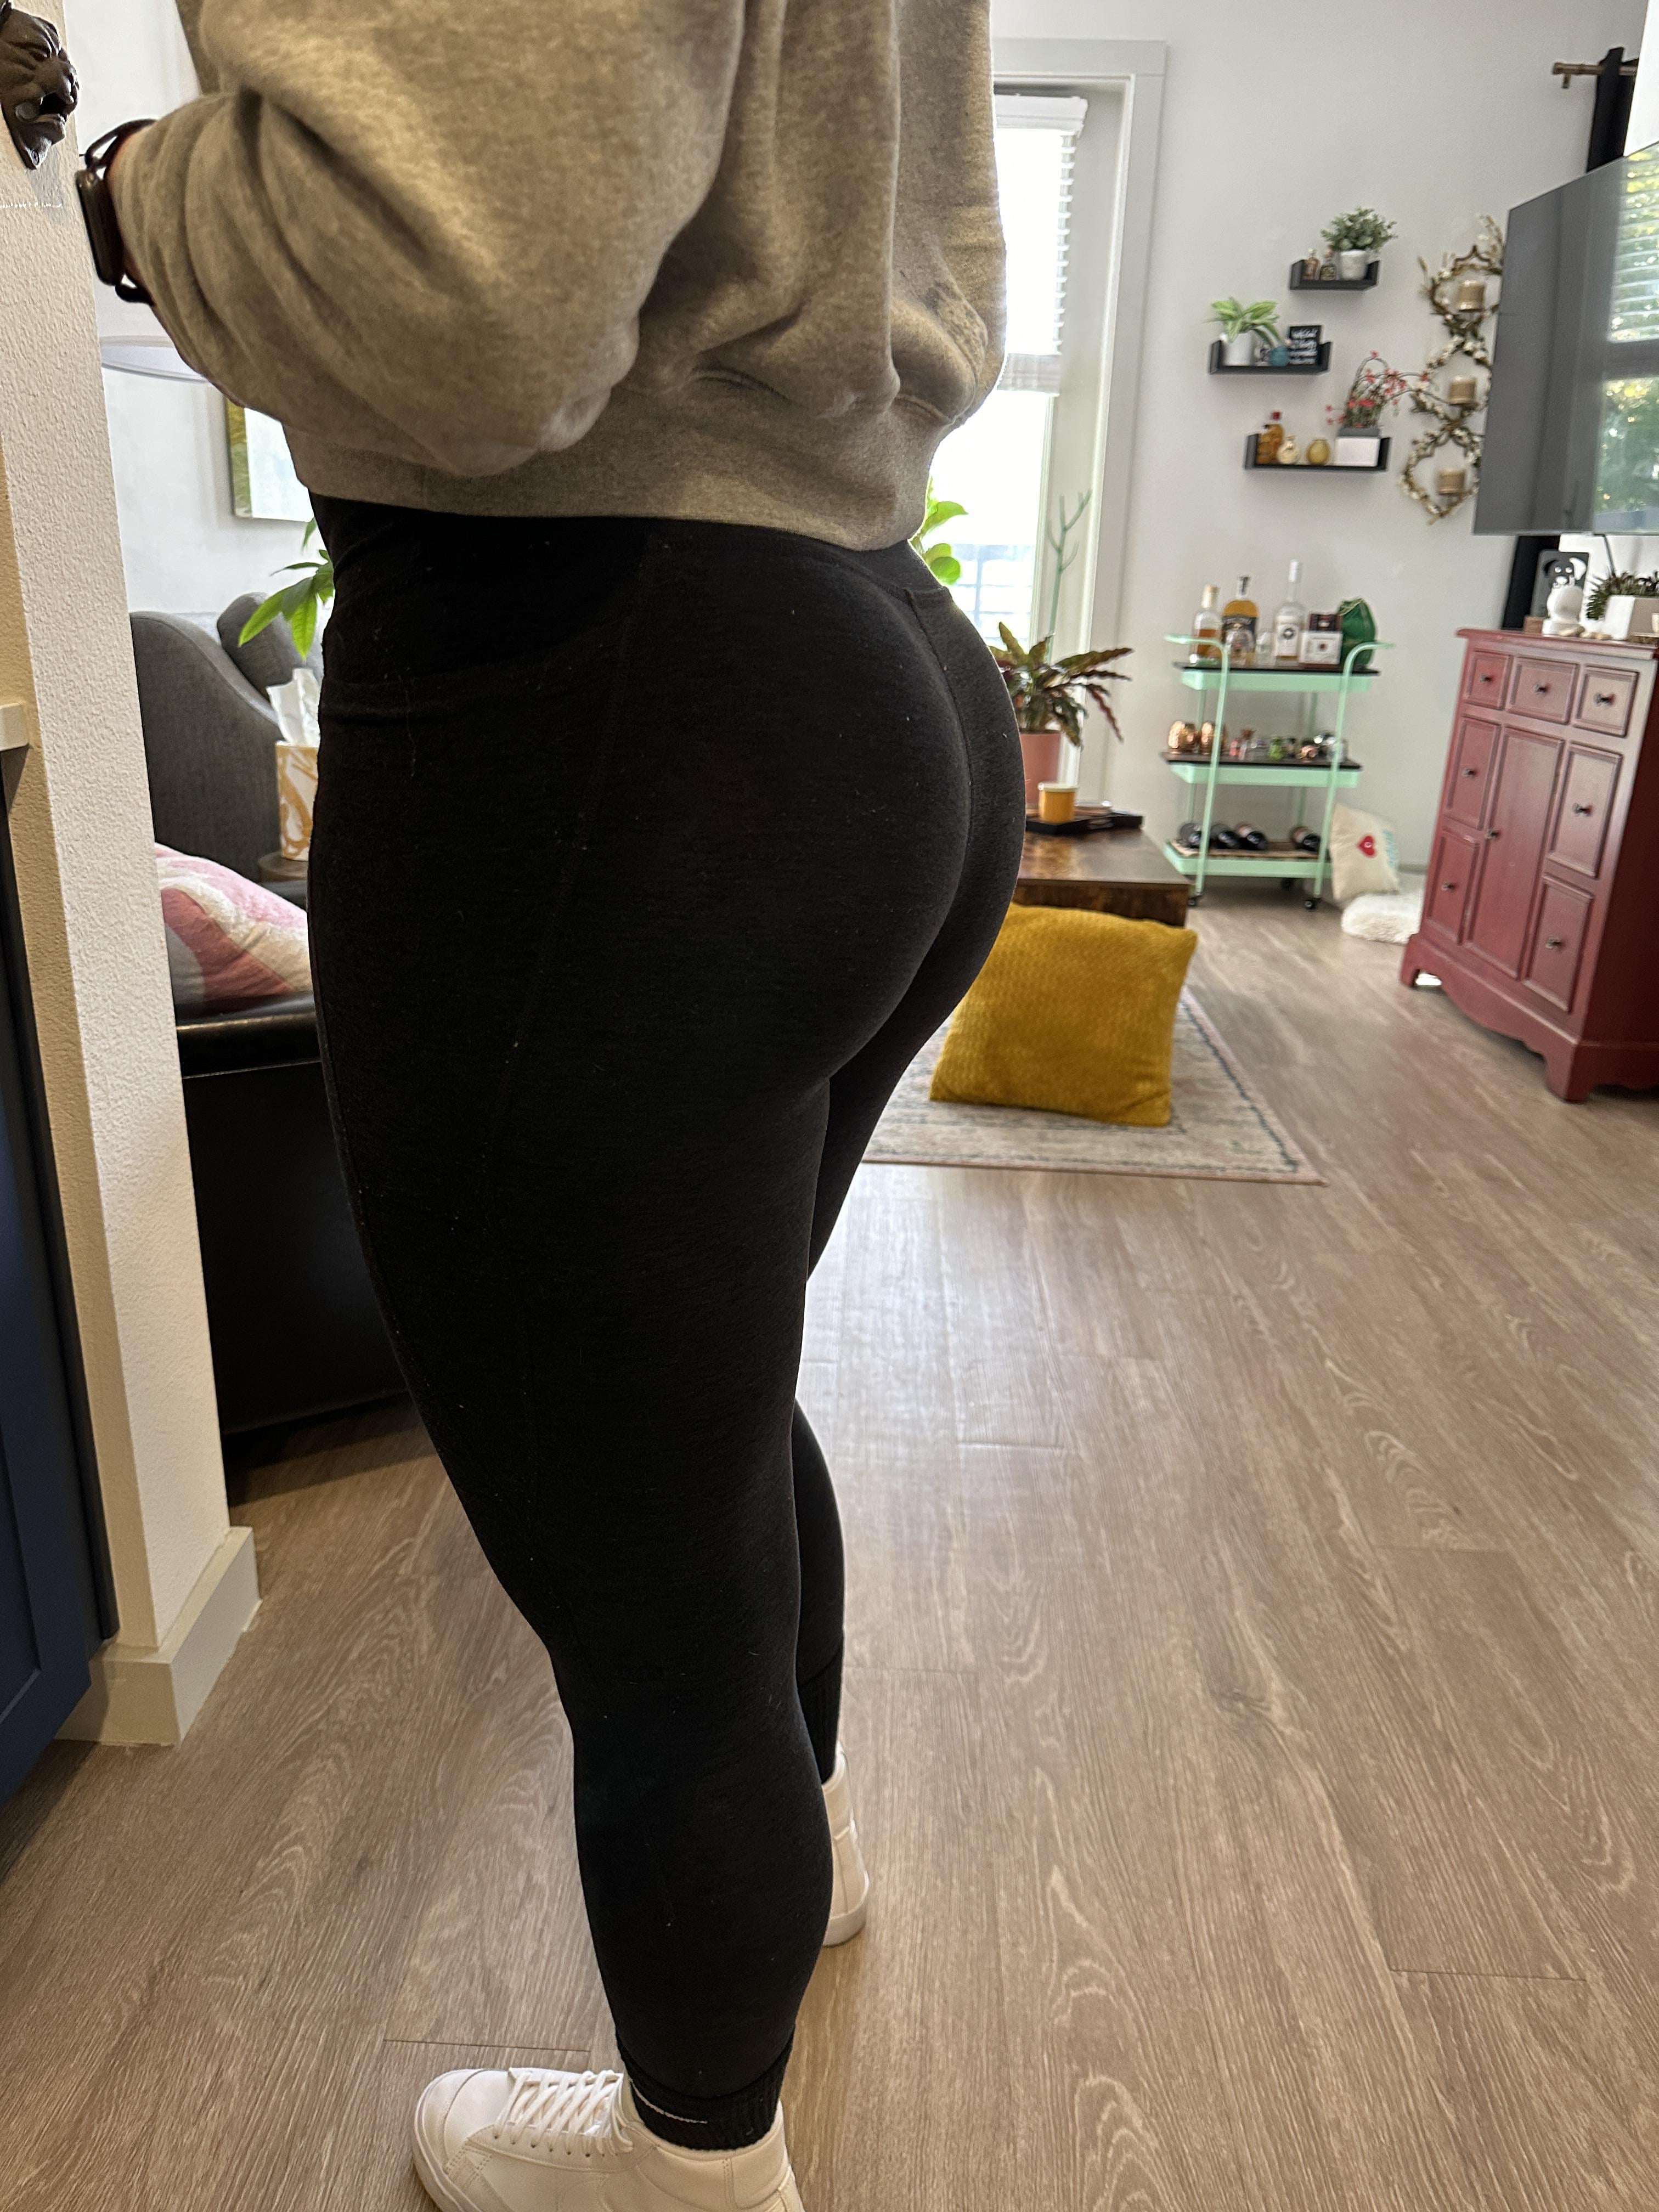 leggings cant even hide my thickness Thick White Girls